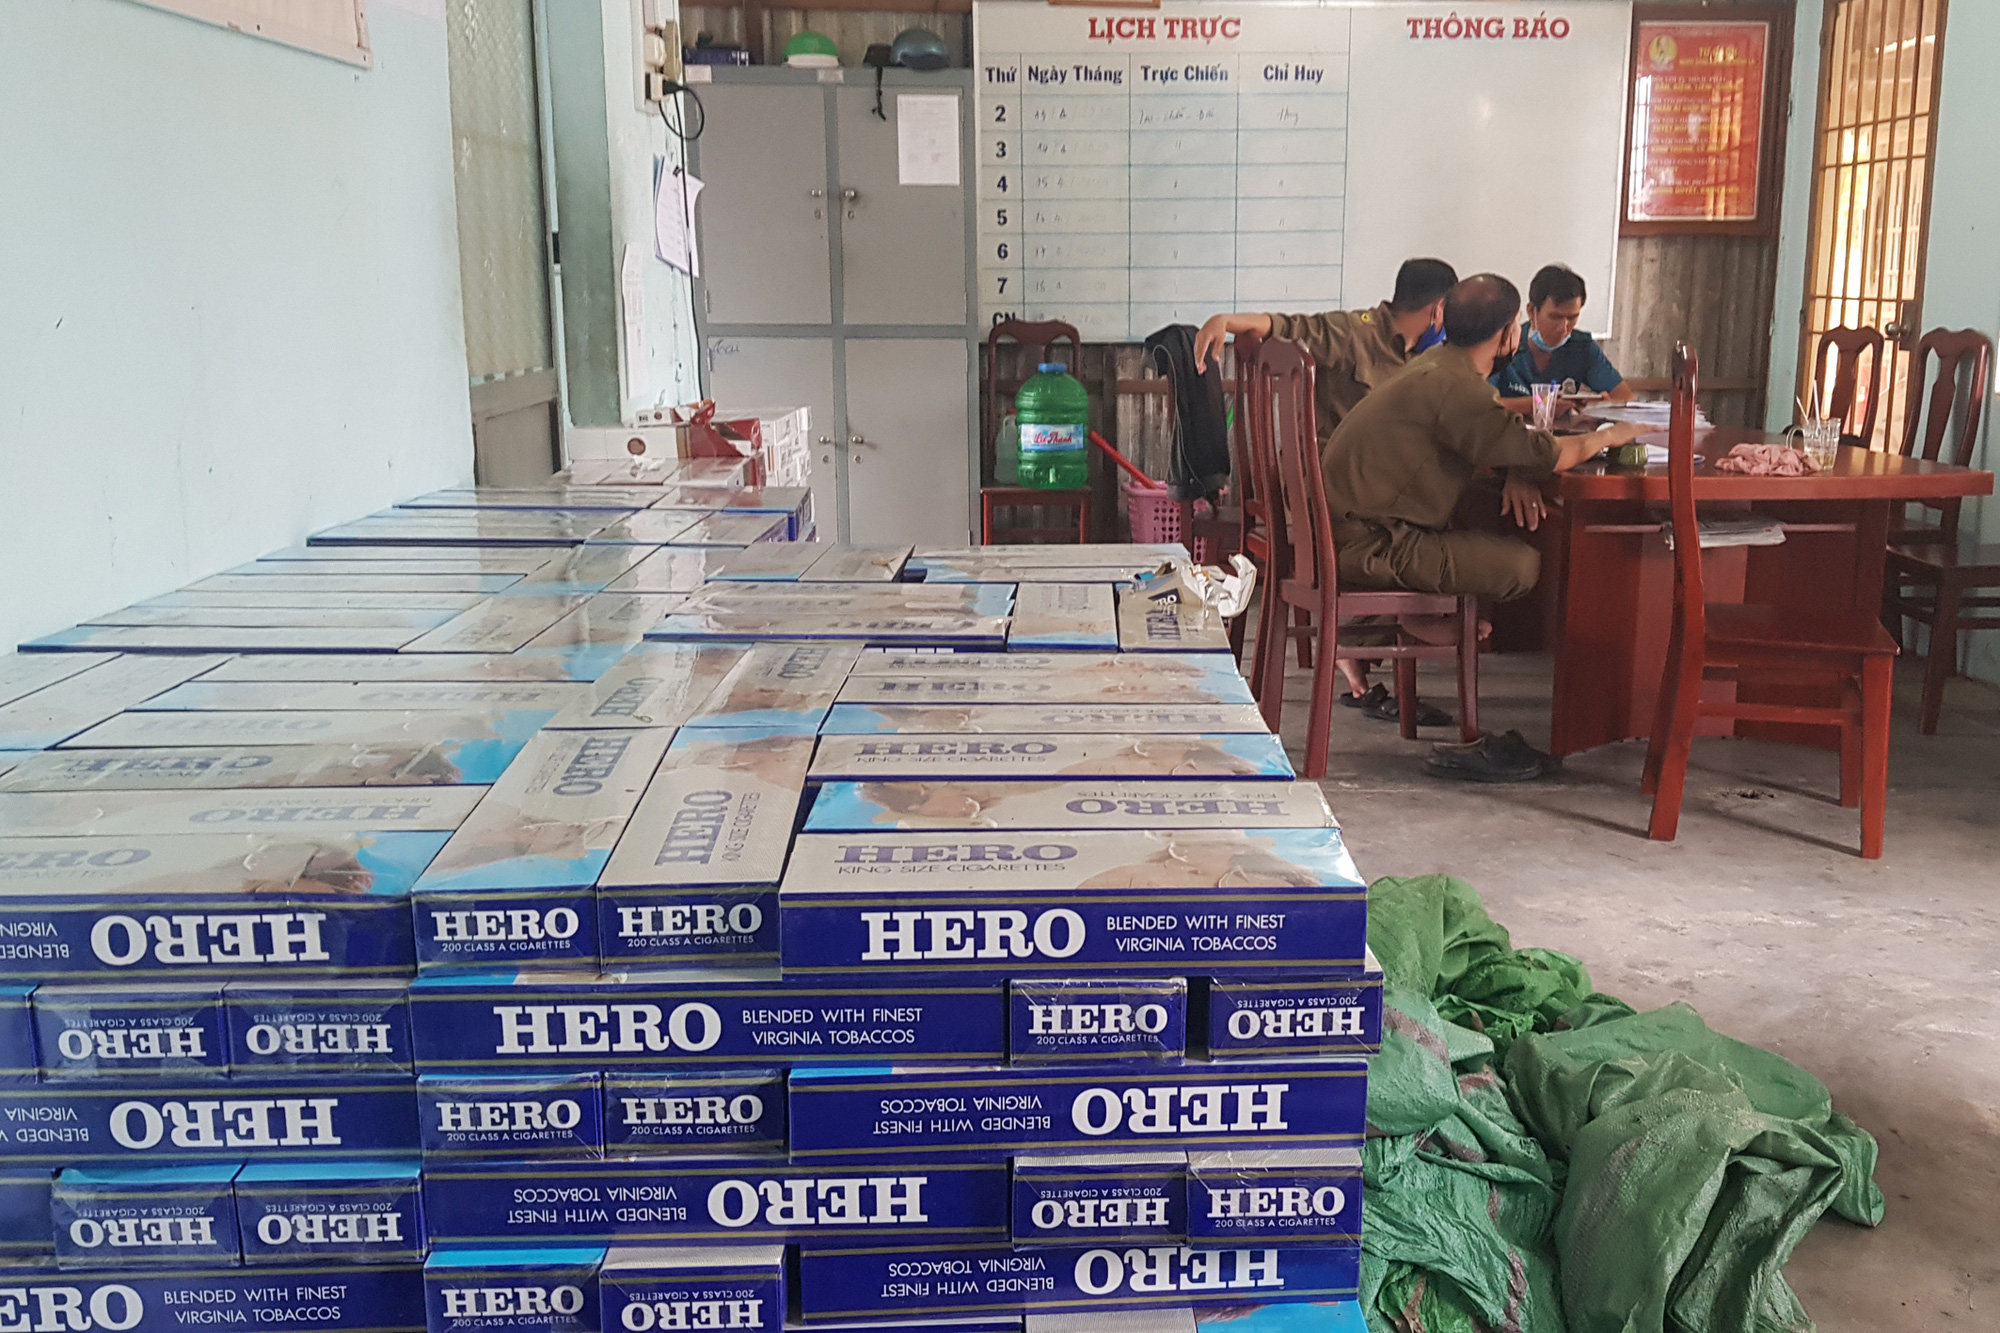 Five officials injured in clash with over 200 cigarette smugglers in southern Vietnam